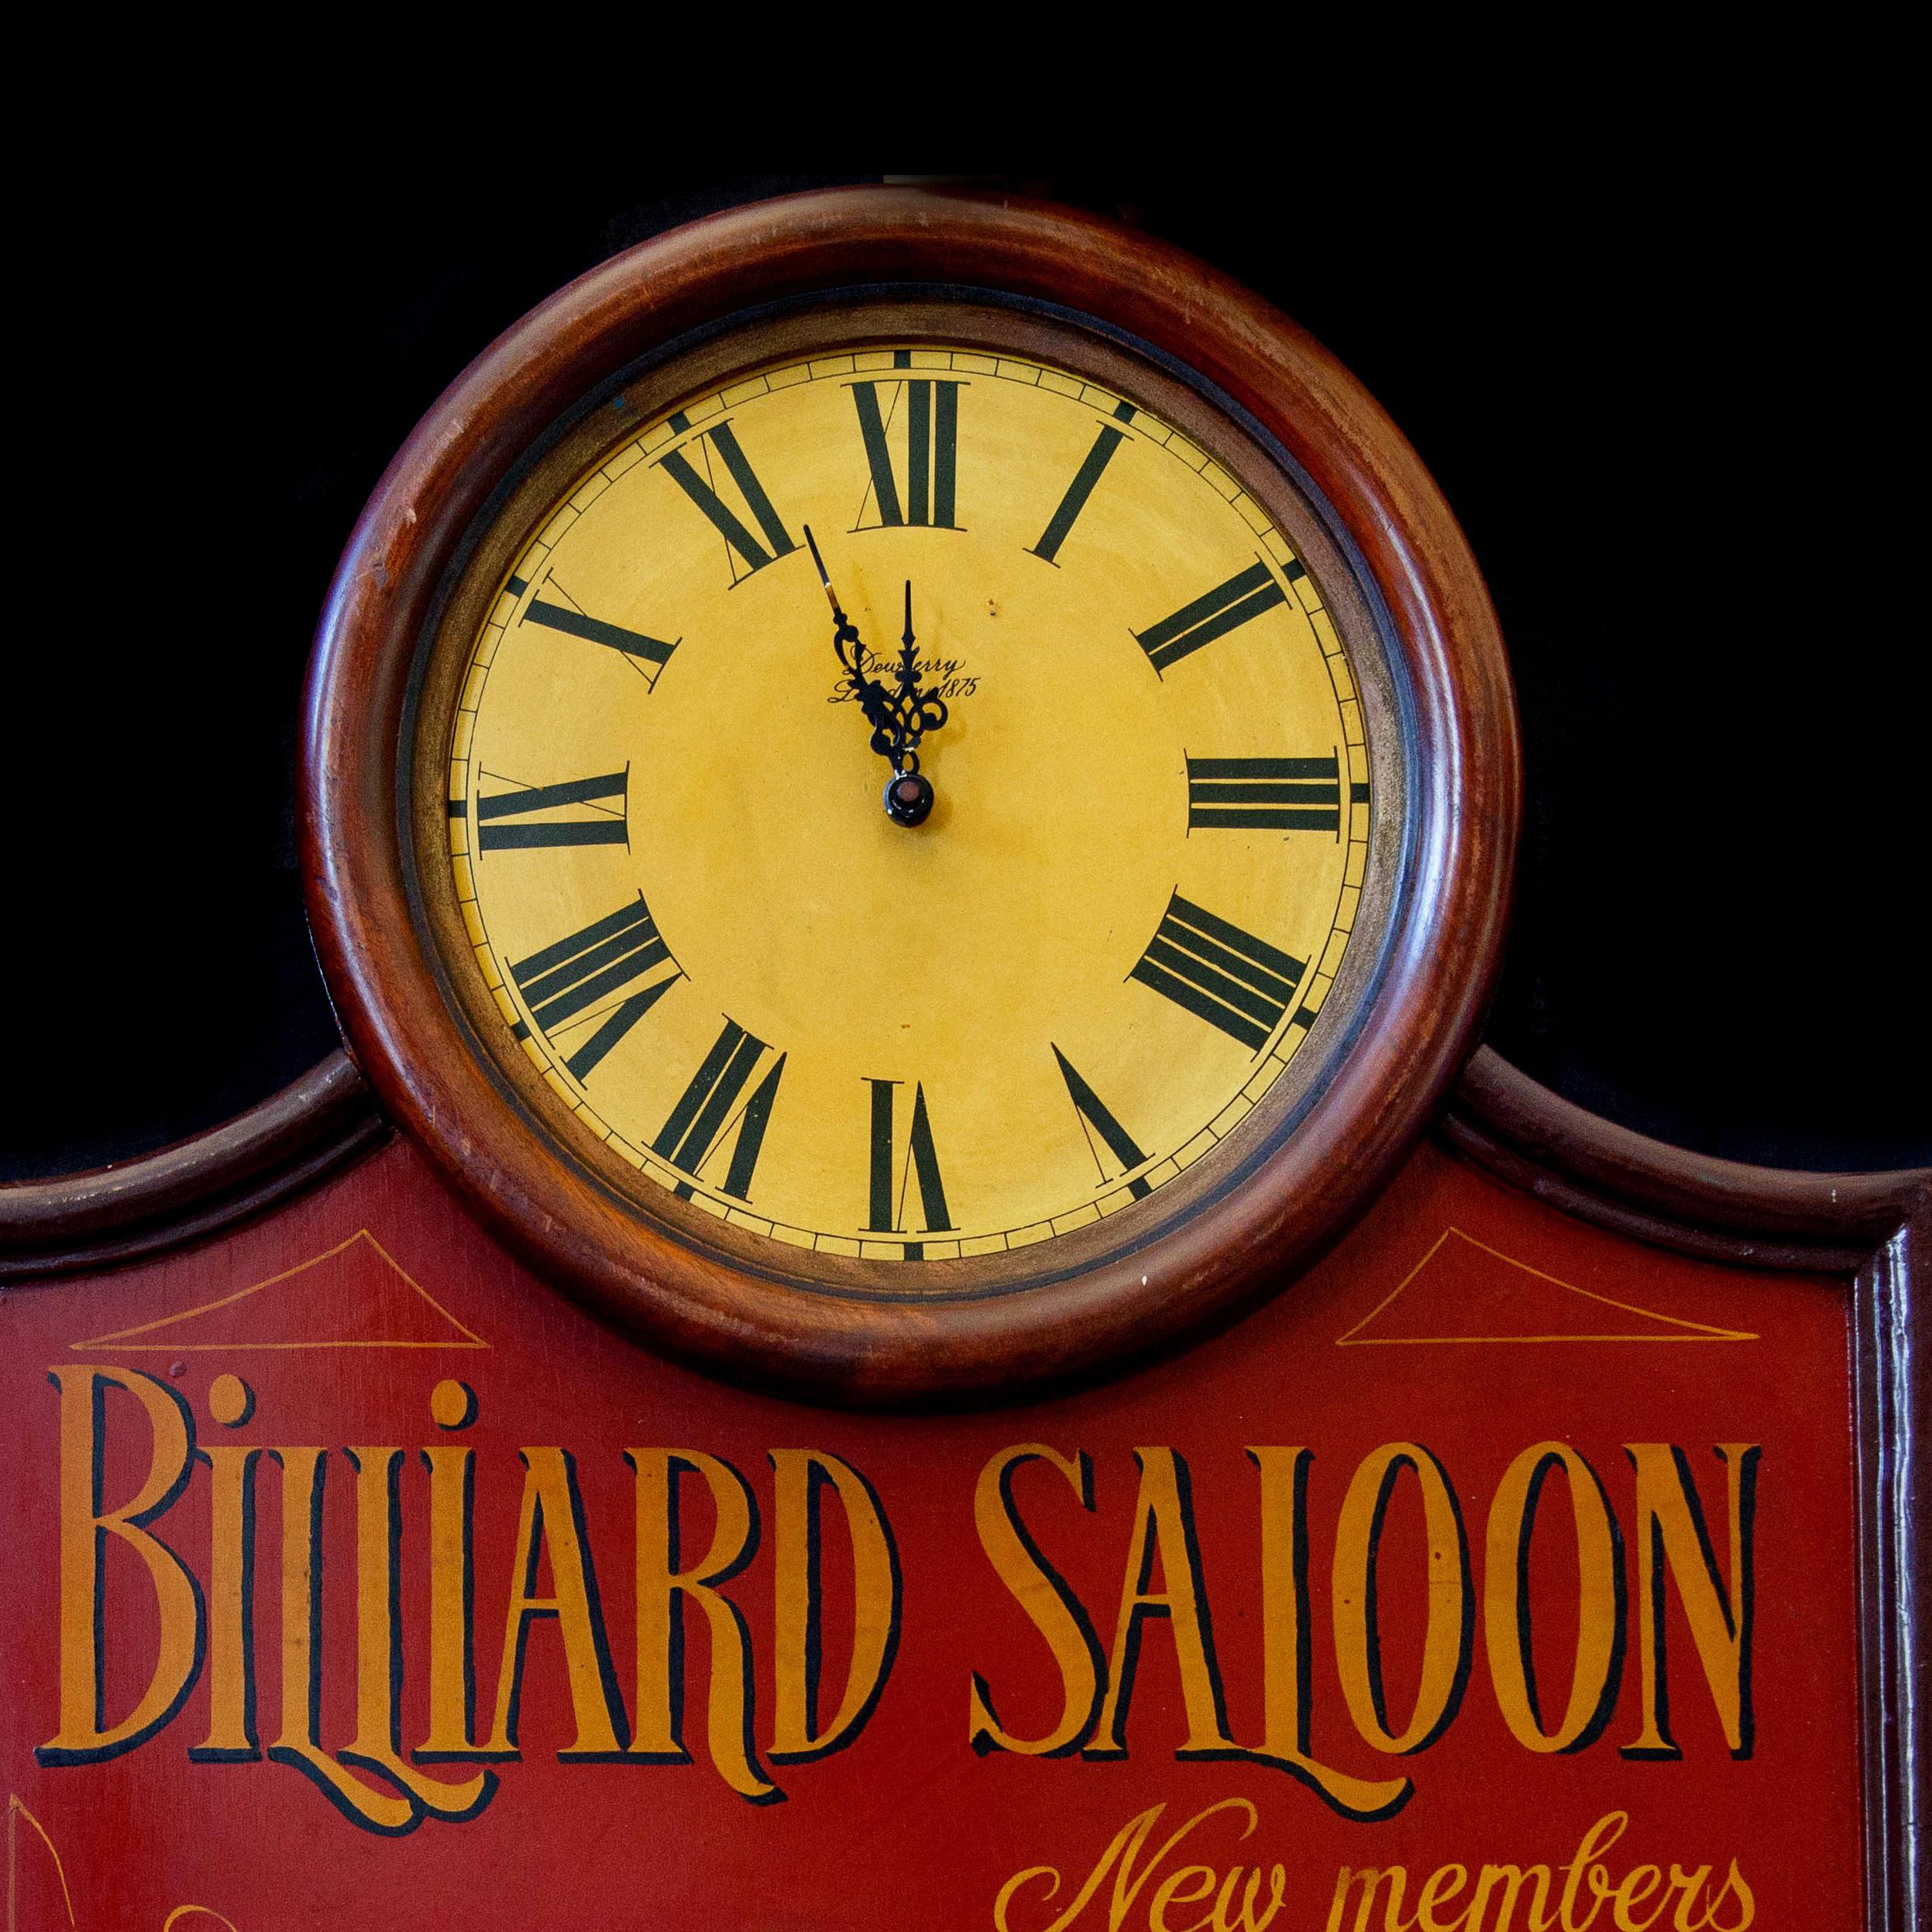 A London Billiard saloon sign - Sculpture by Unknown